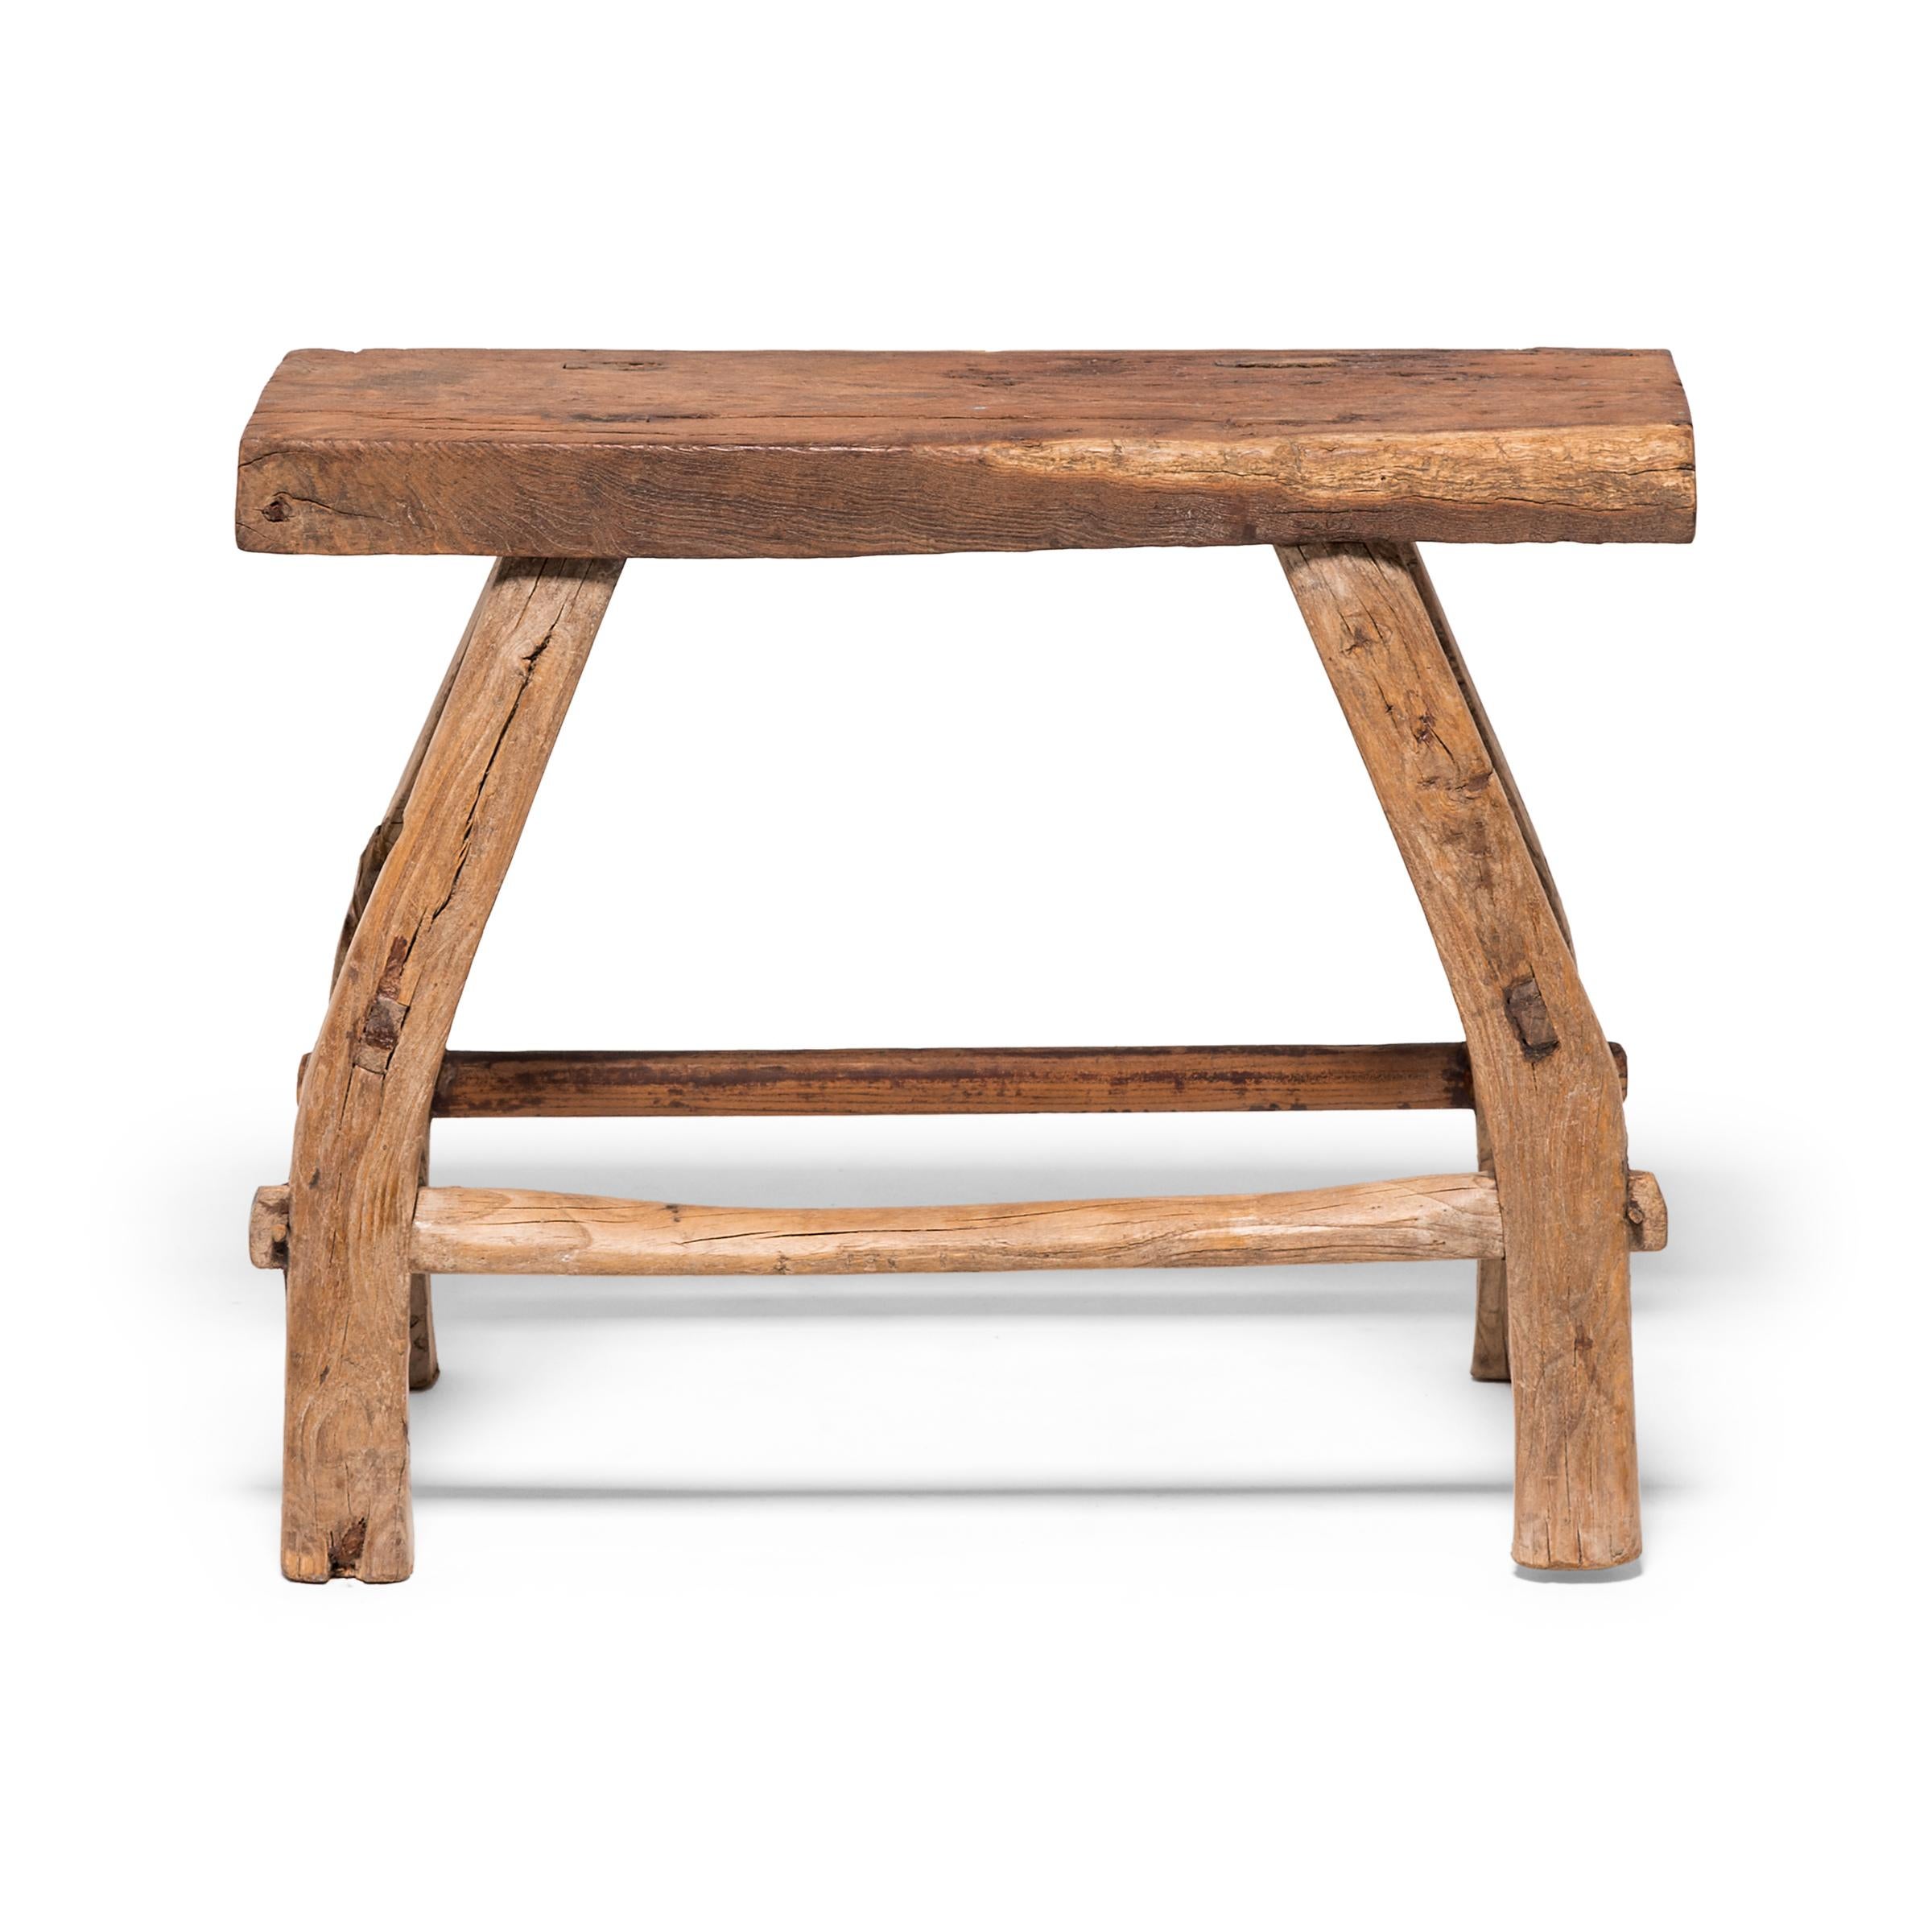 Rustic Provincial Chinese Work Stool